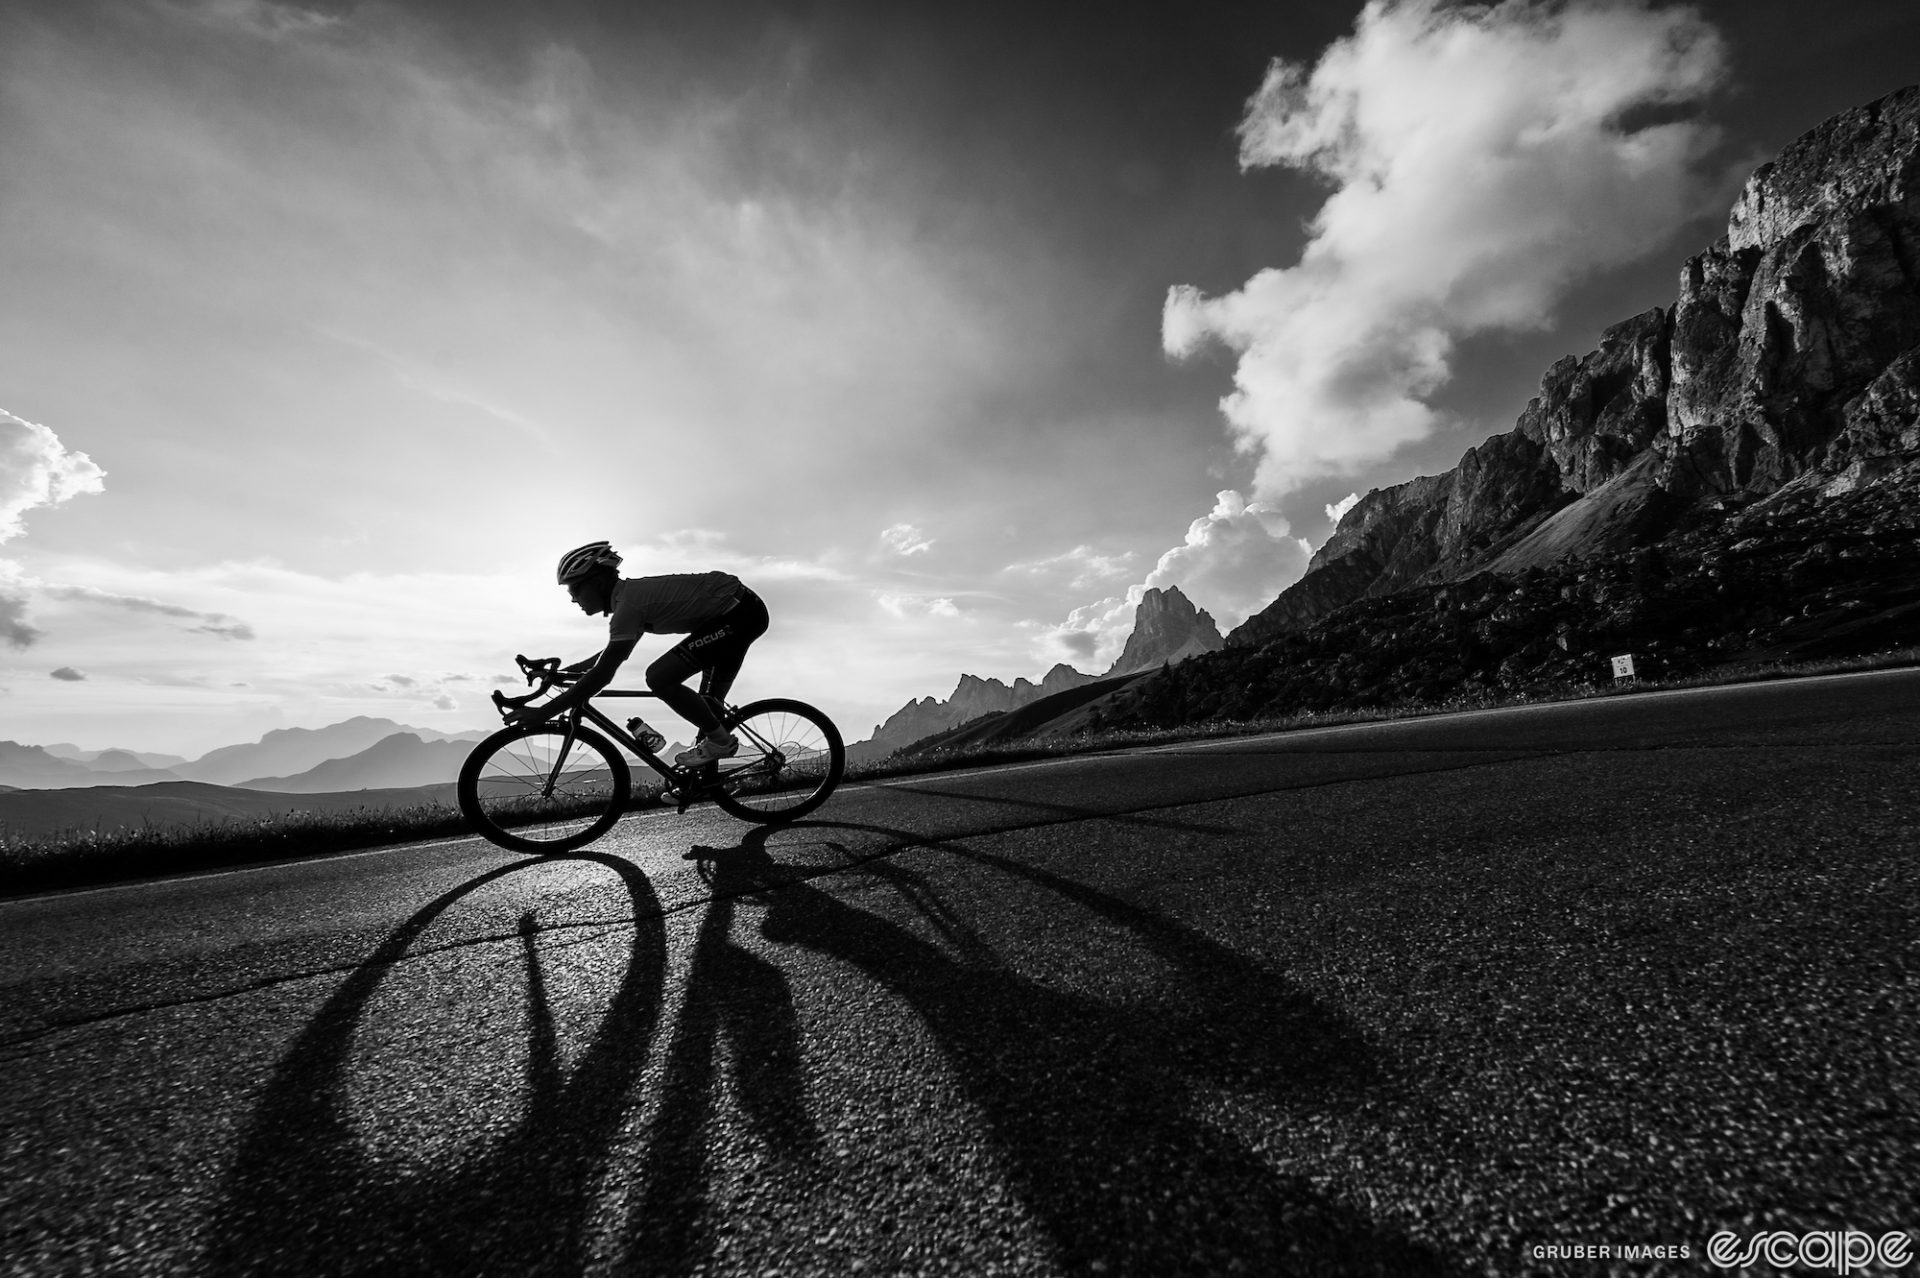 A black and white photo of a rider descending a paved road with rocky mountains in the background. The rider is backlit and silhouetted against the sky.